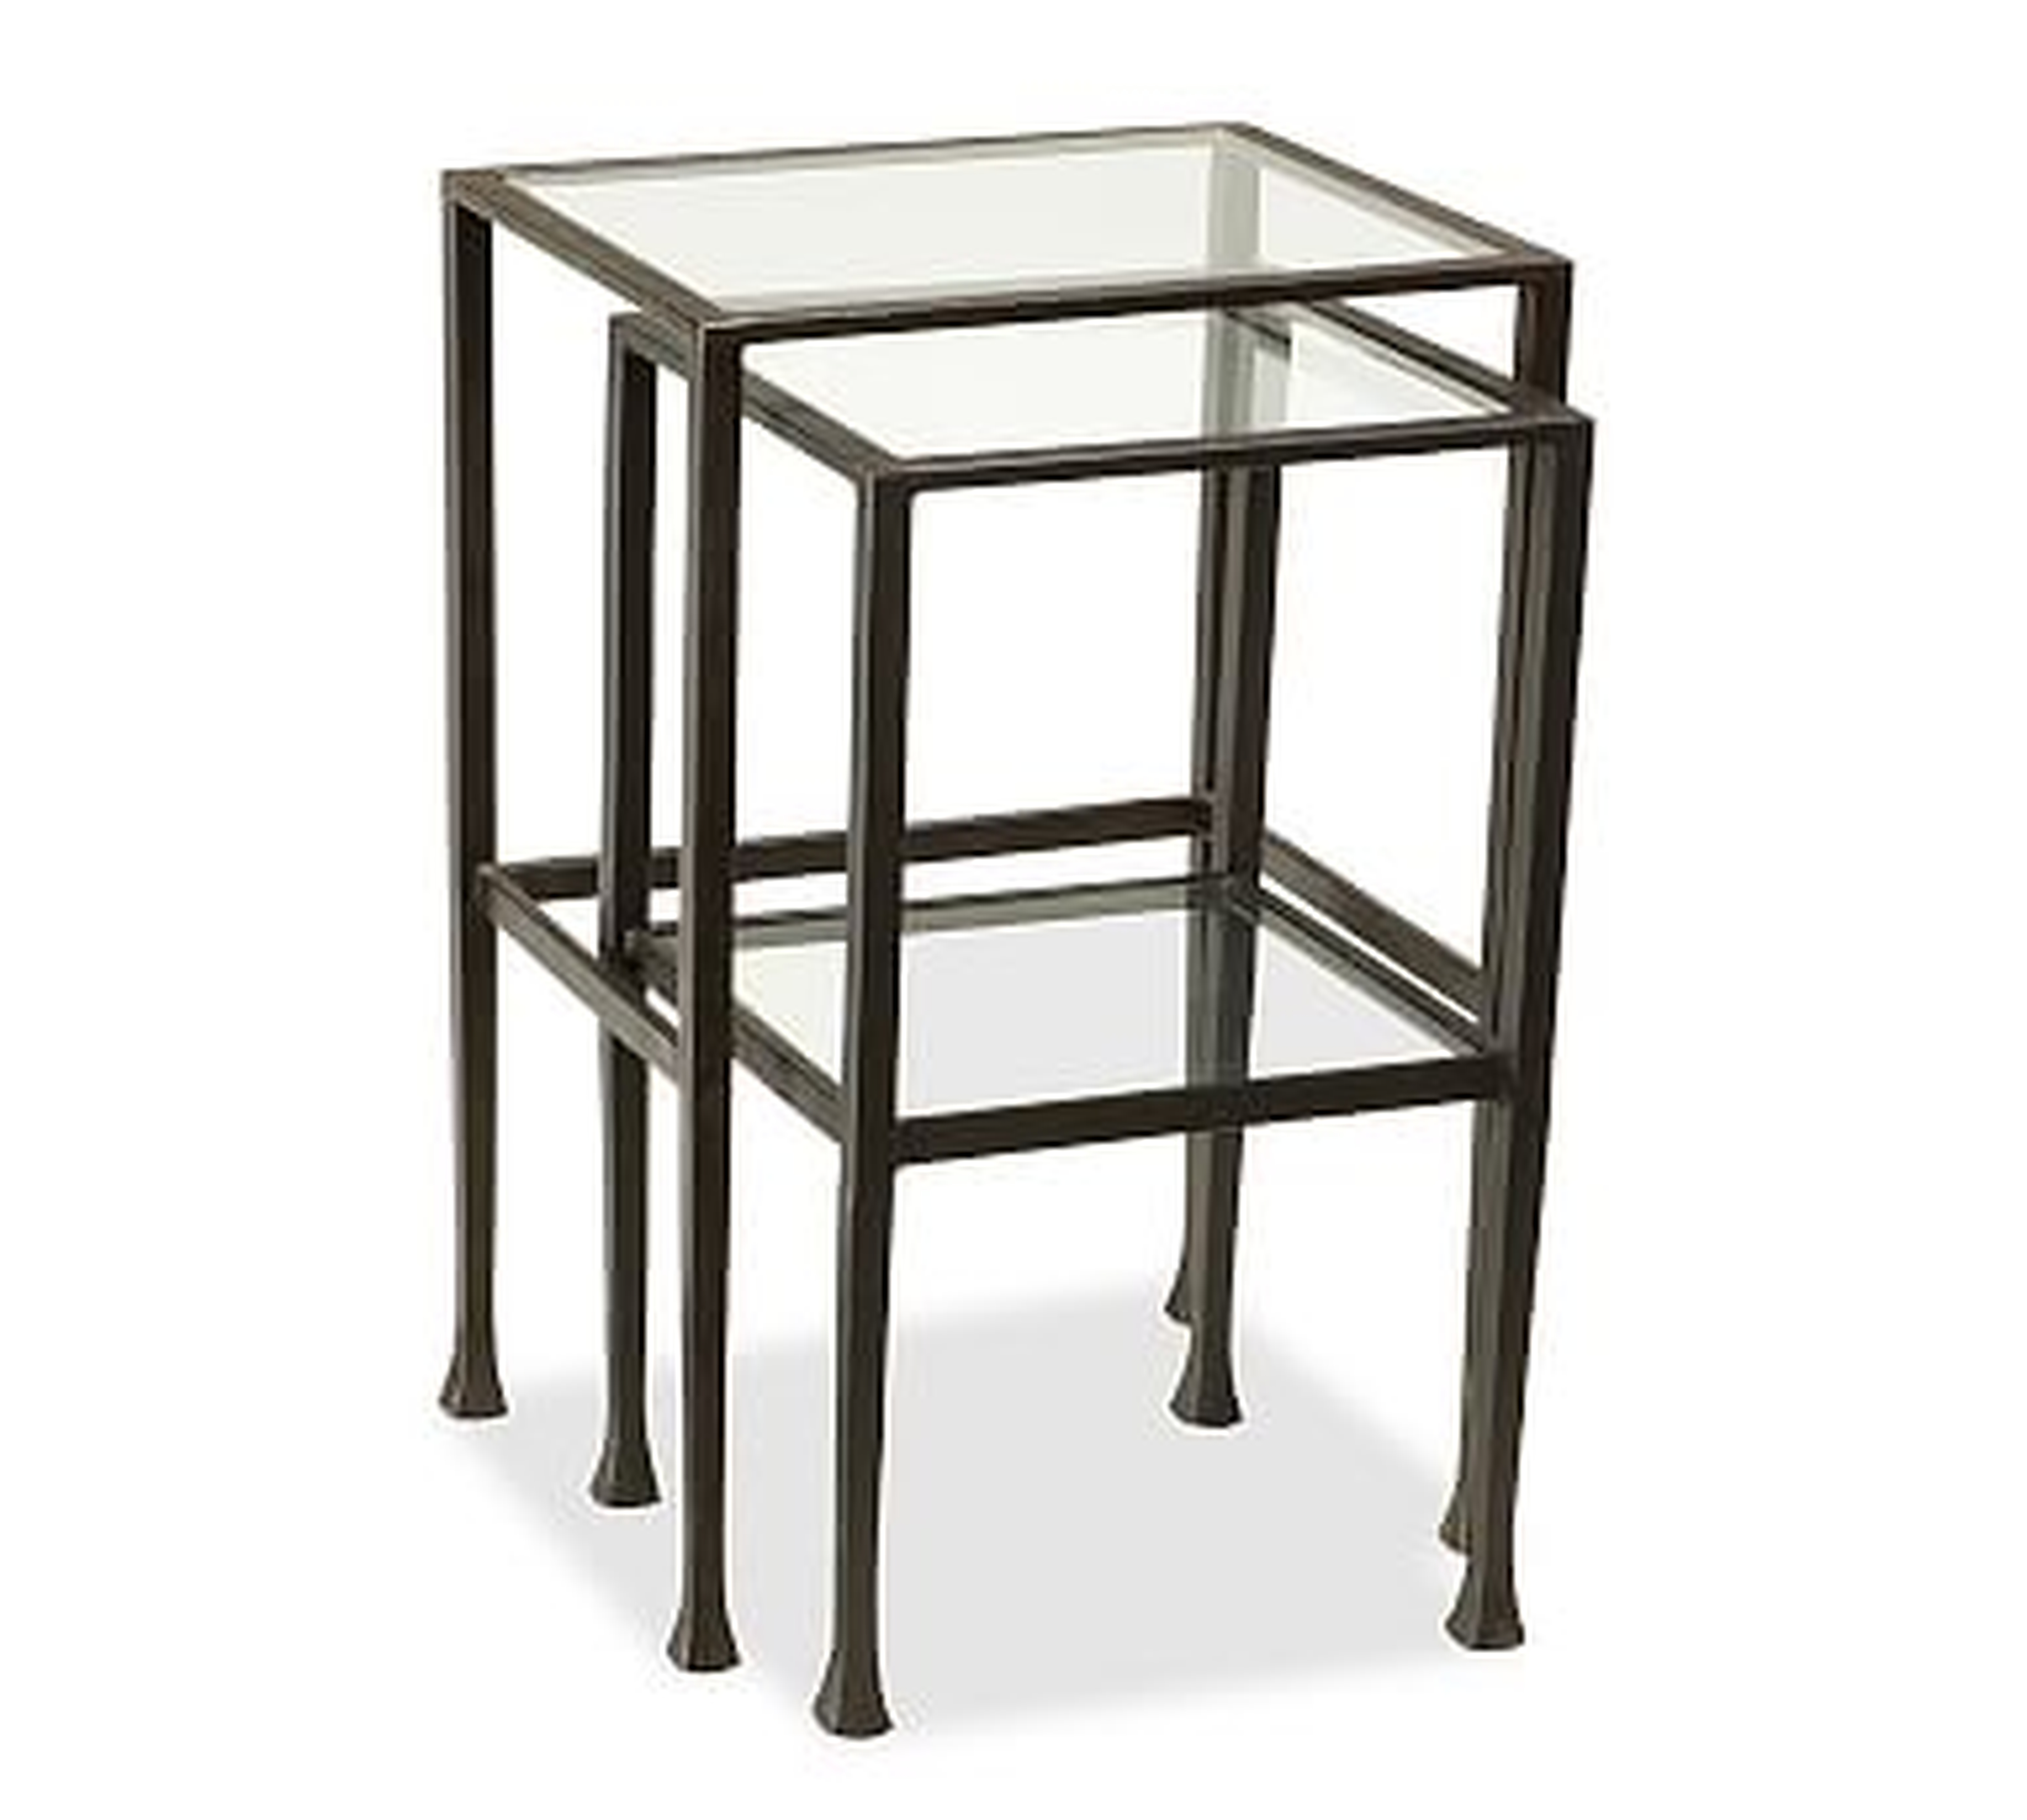 Tanner Metal &amp; Glass Nesting Tables, Set of 2, Matte Iron-Bronze finish, Premium In-Home Delivery - Pottery Barn